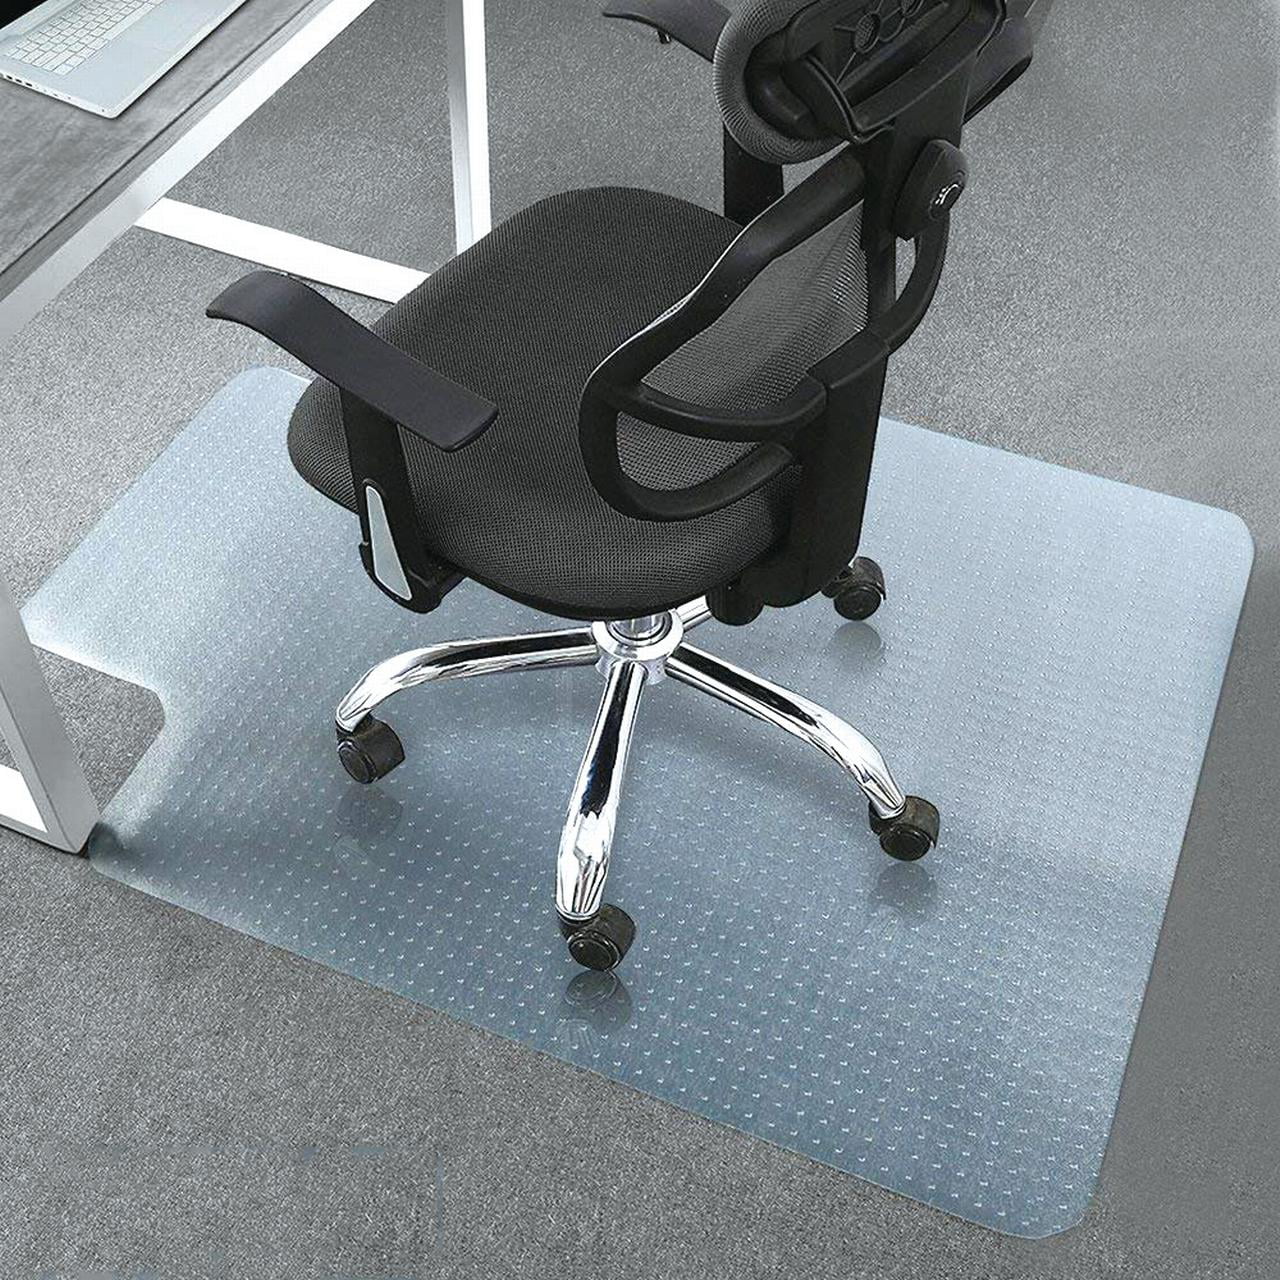  Home Office Chair Mat with Simple Decor